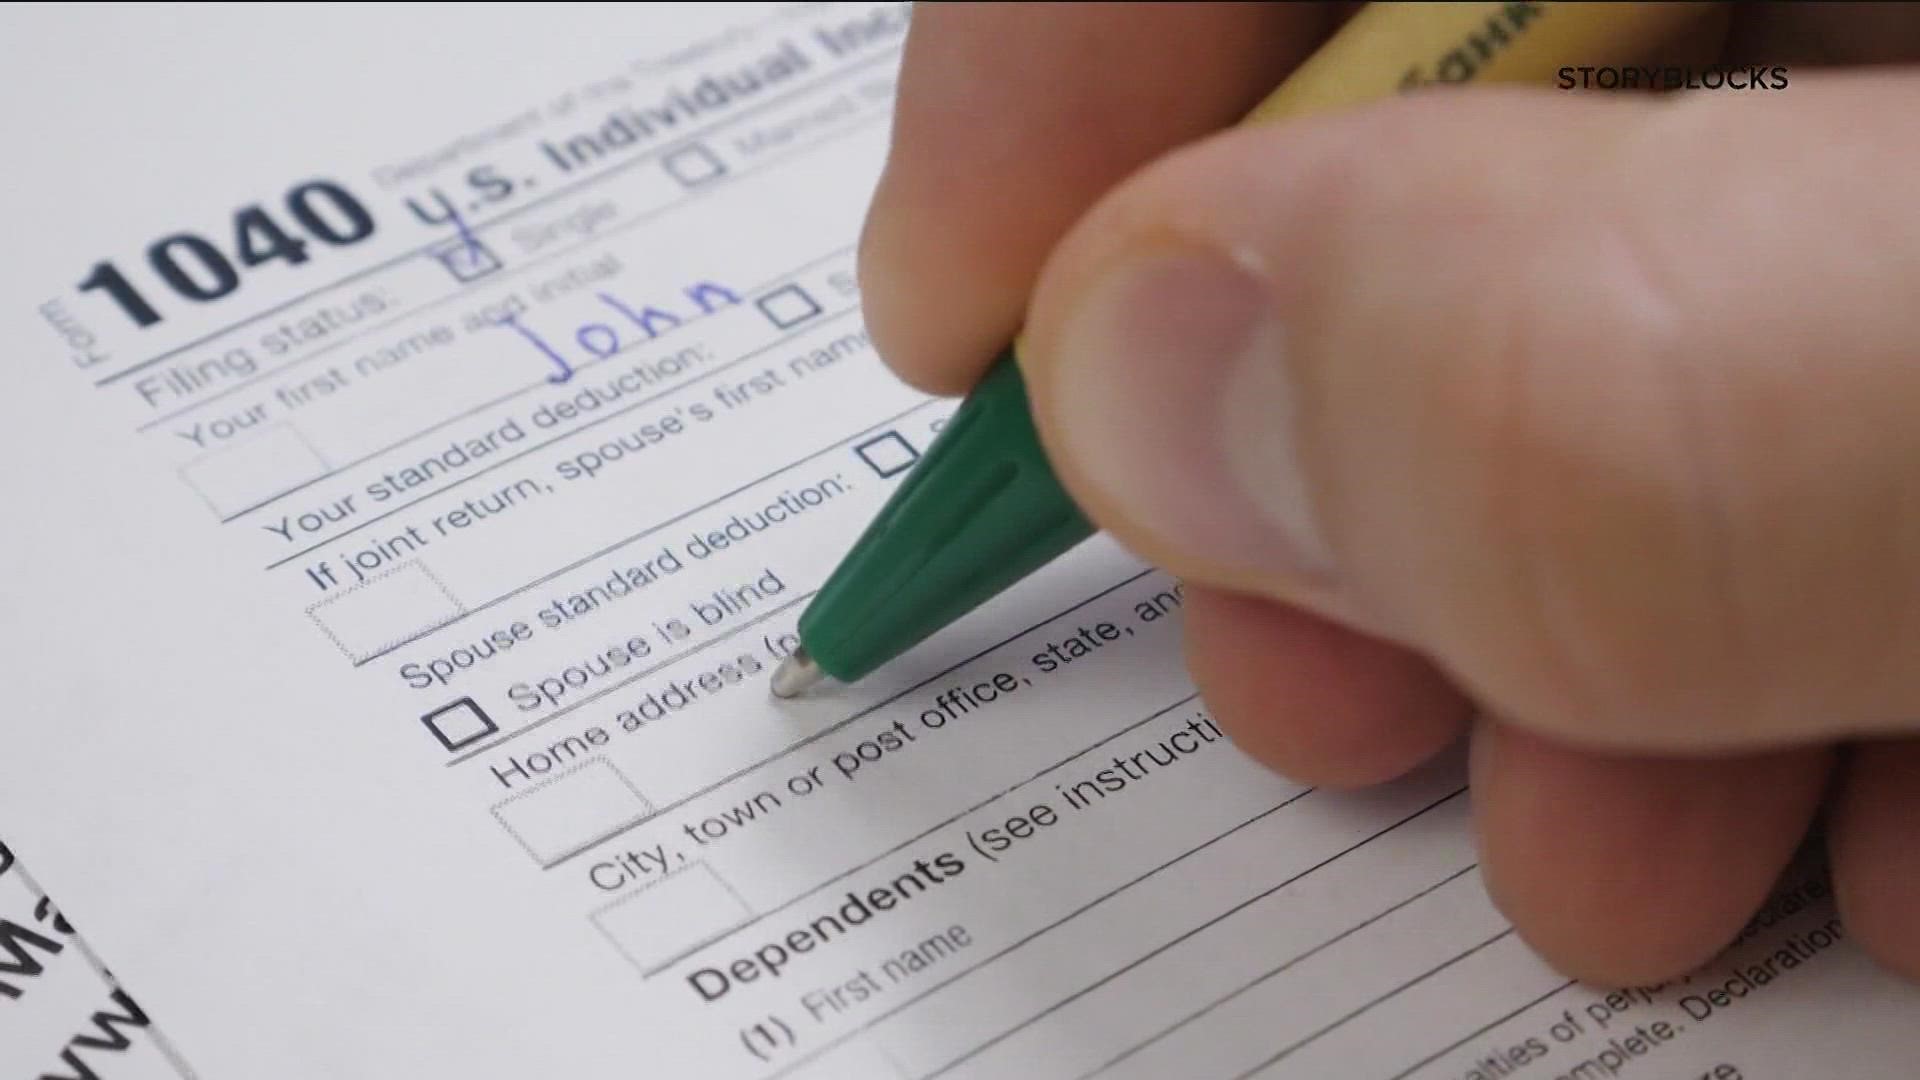 This tax season will be much different for many people. Here are some tax return tips and changes.